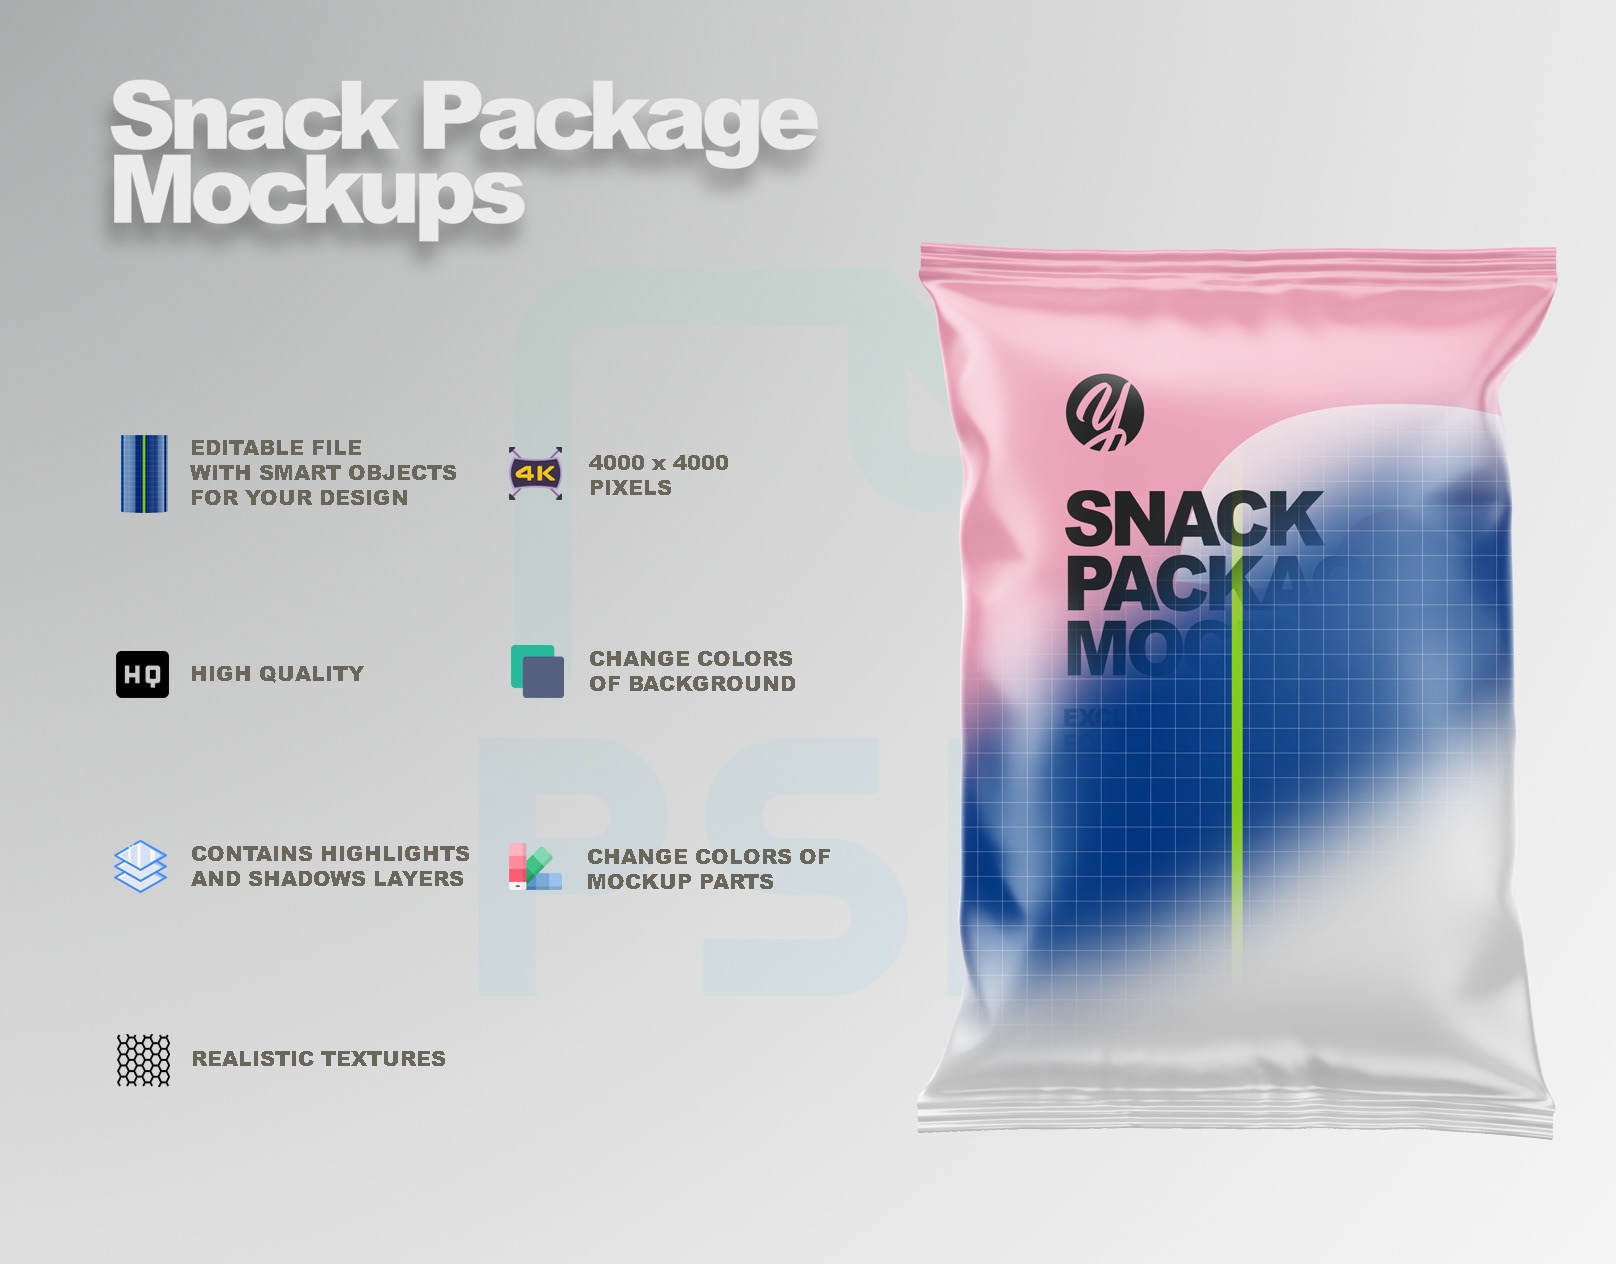 Snack Package Mockups363a6f91432357.5e31a0c61c810.jpg